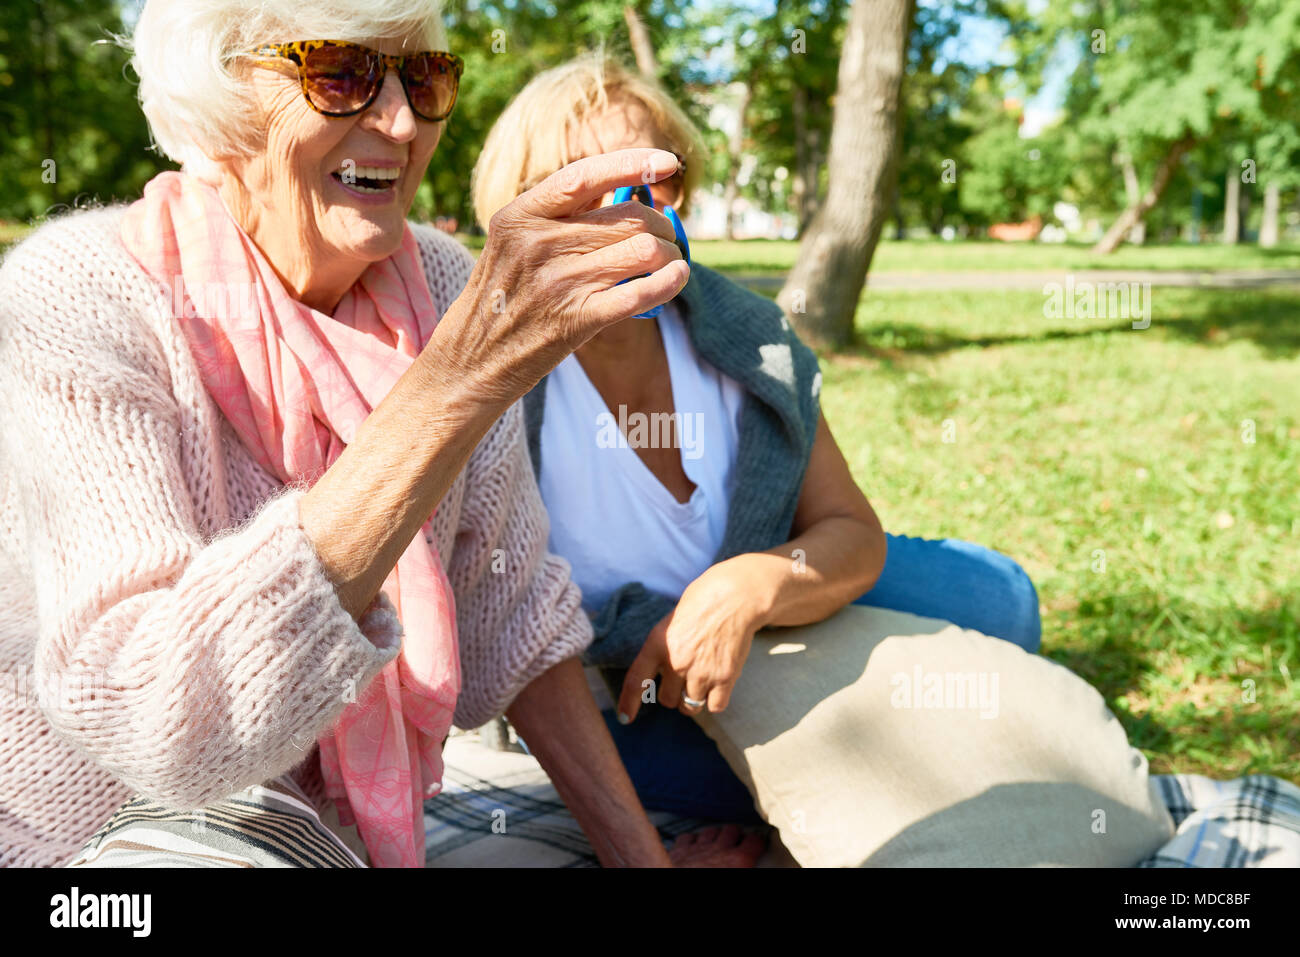 Senior Woman Playing with Fidget Spinner Stock Photo